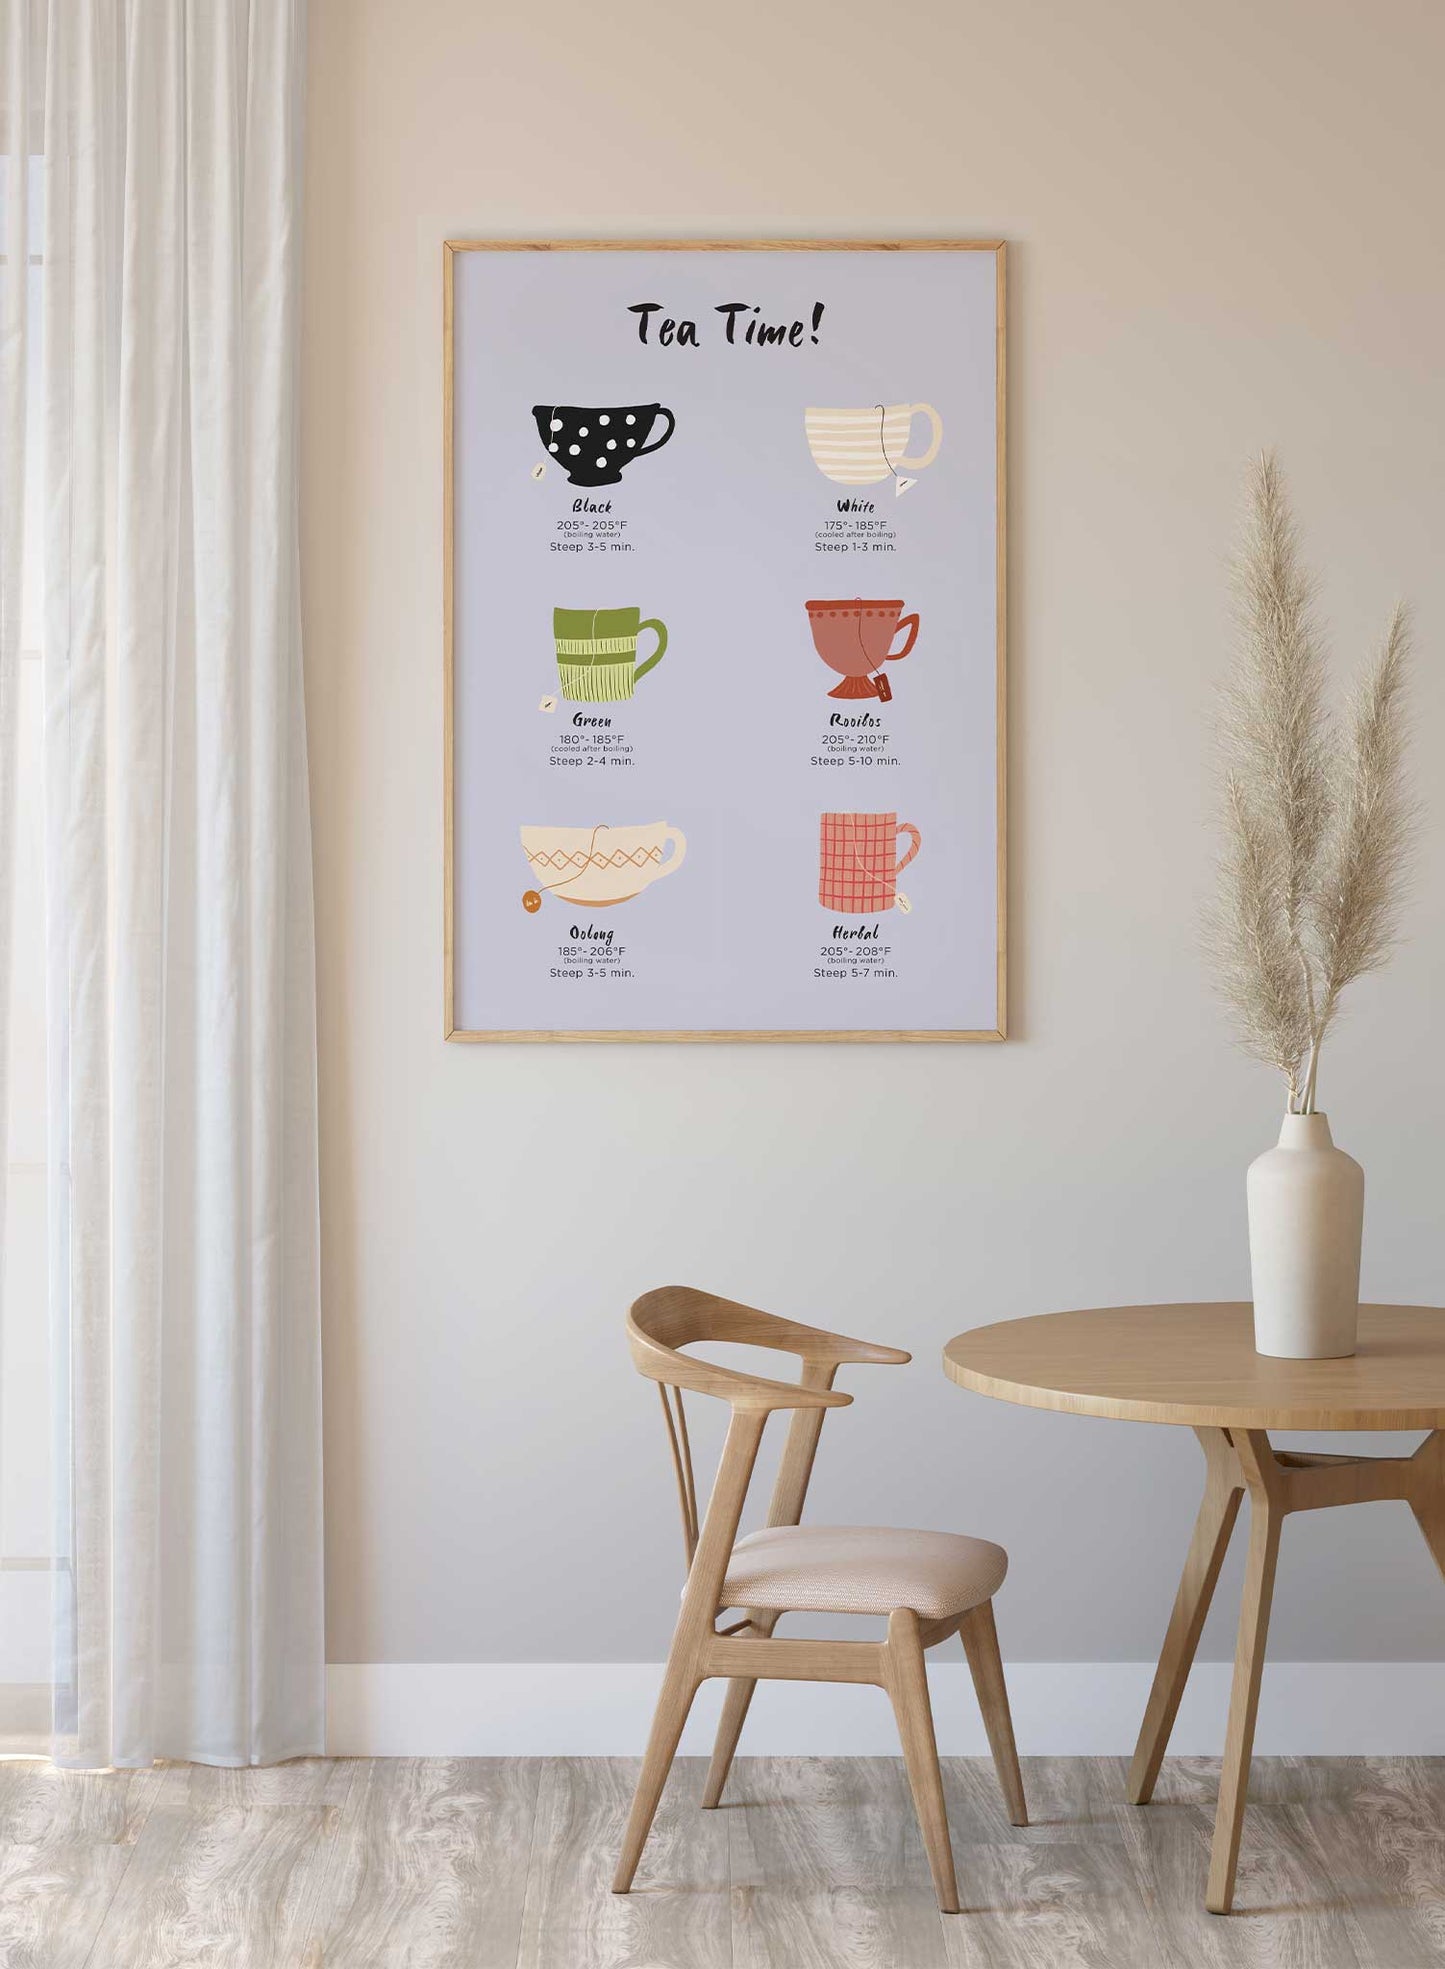 Tea Time is an illustrated tea guide poster by Opposite Wall.